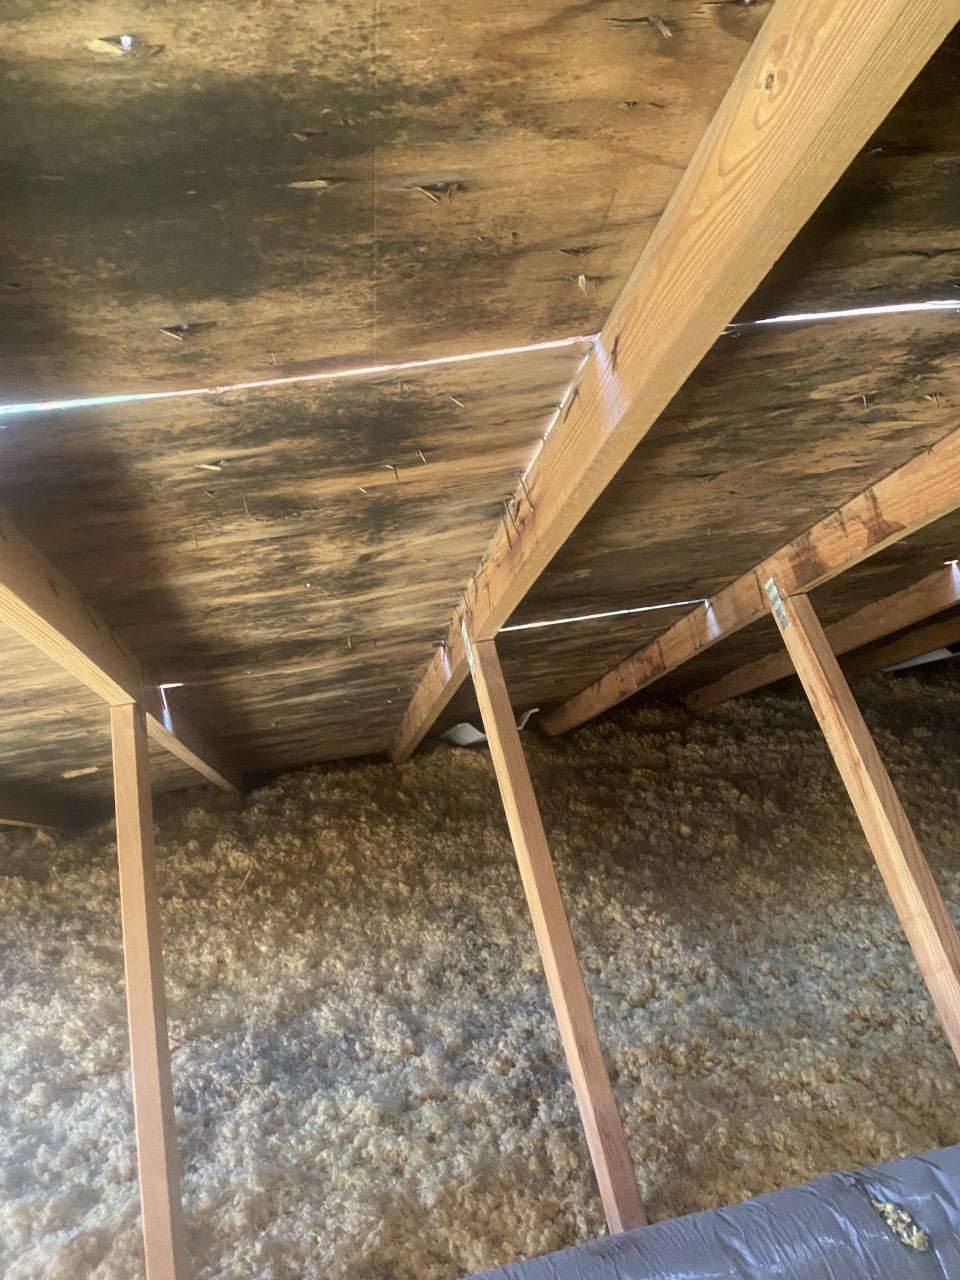 Mold on interior of roof base